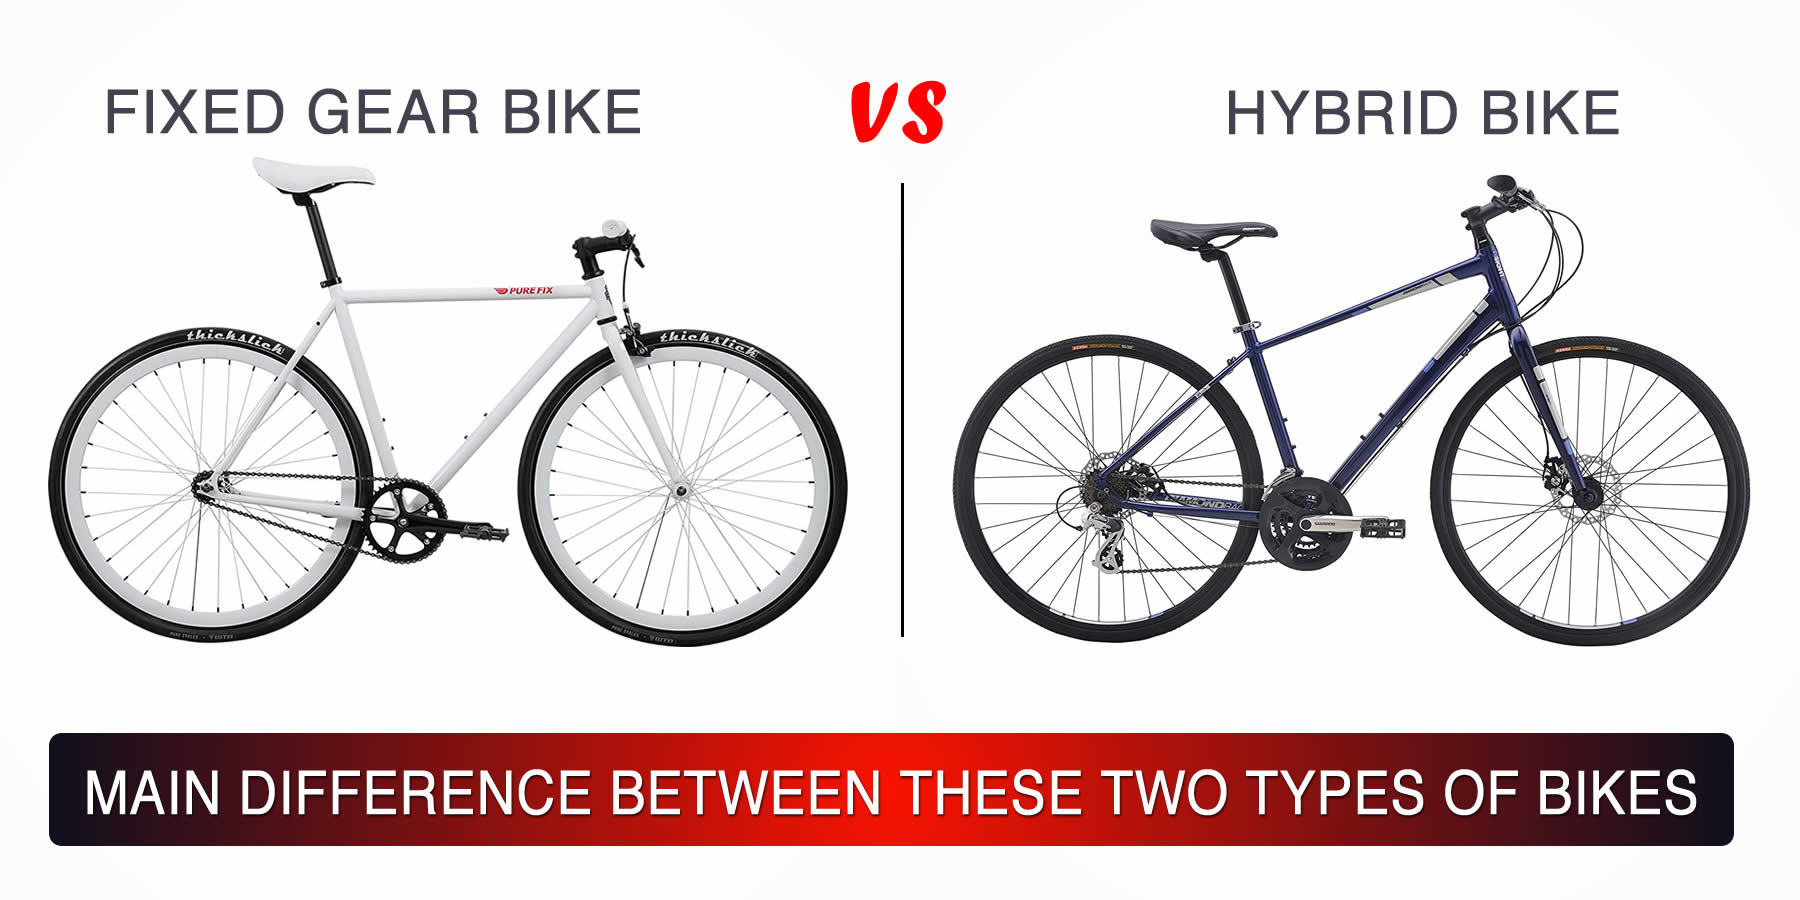 Fixed Gear Bike Vs Hybrid Bike – Main Difference Between These Two Types of Bikes